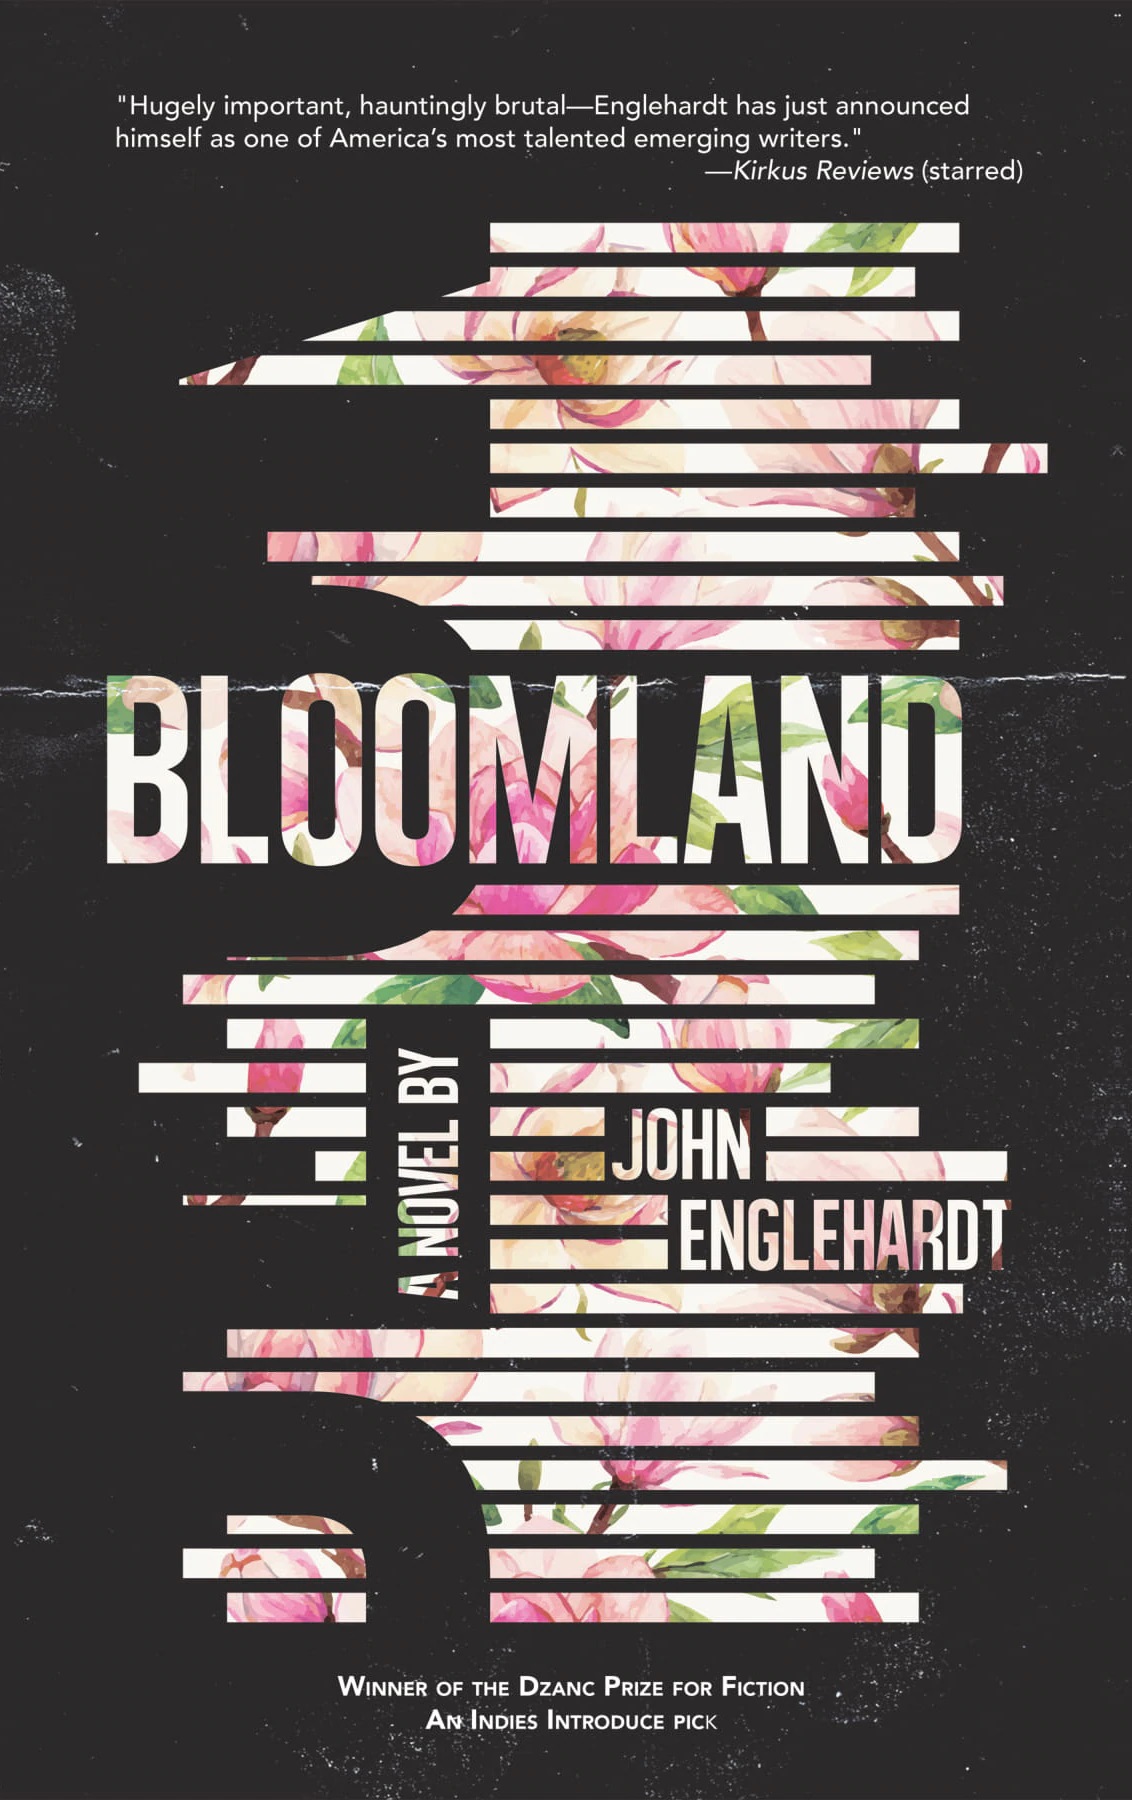 the cover of bloomland, a novel by John Englehardt